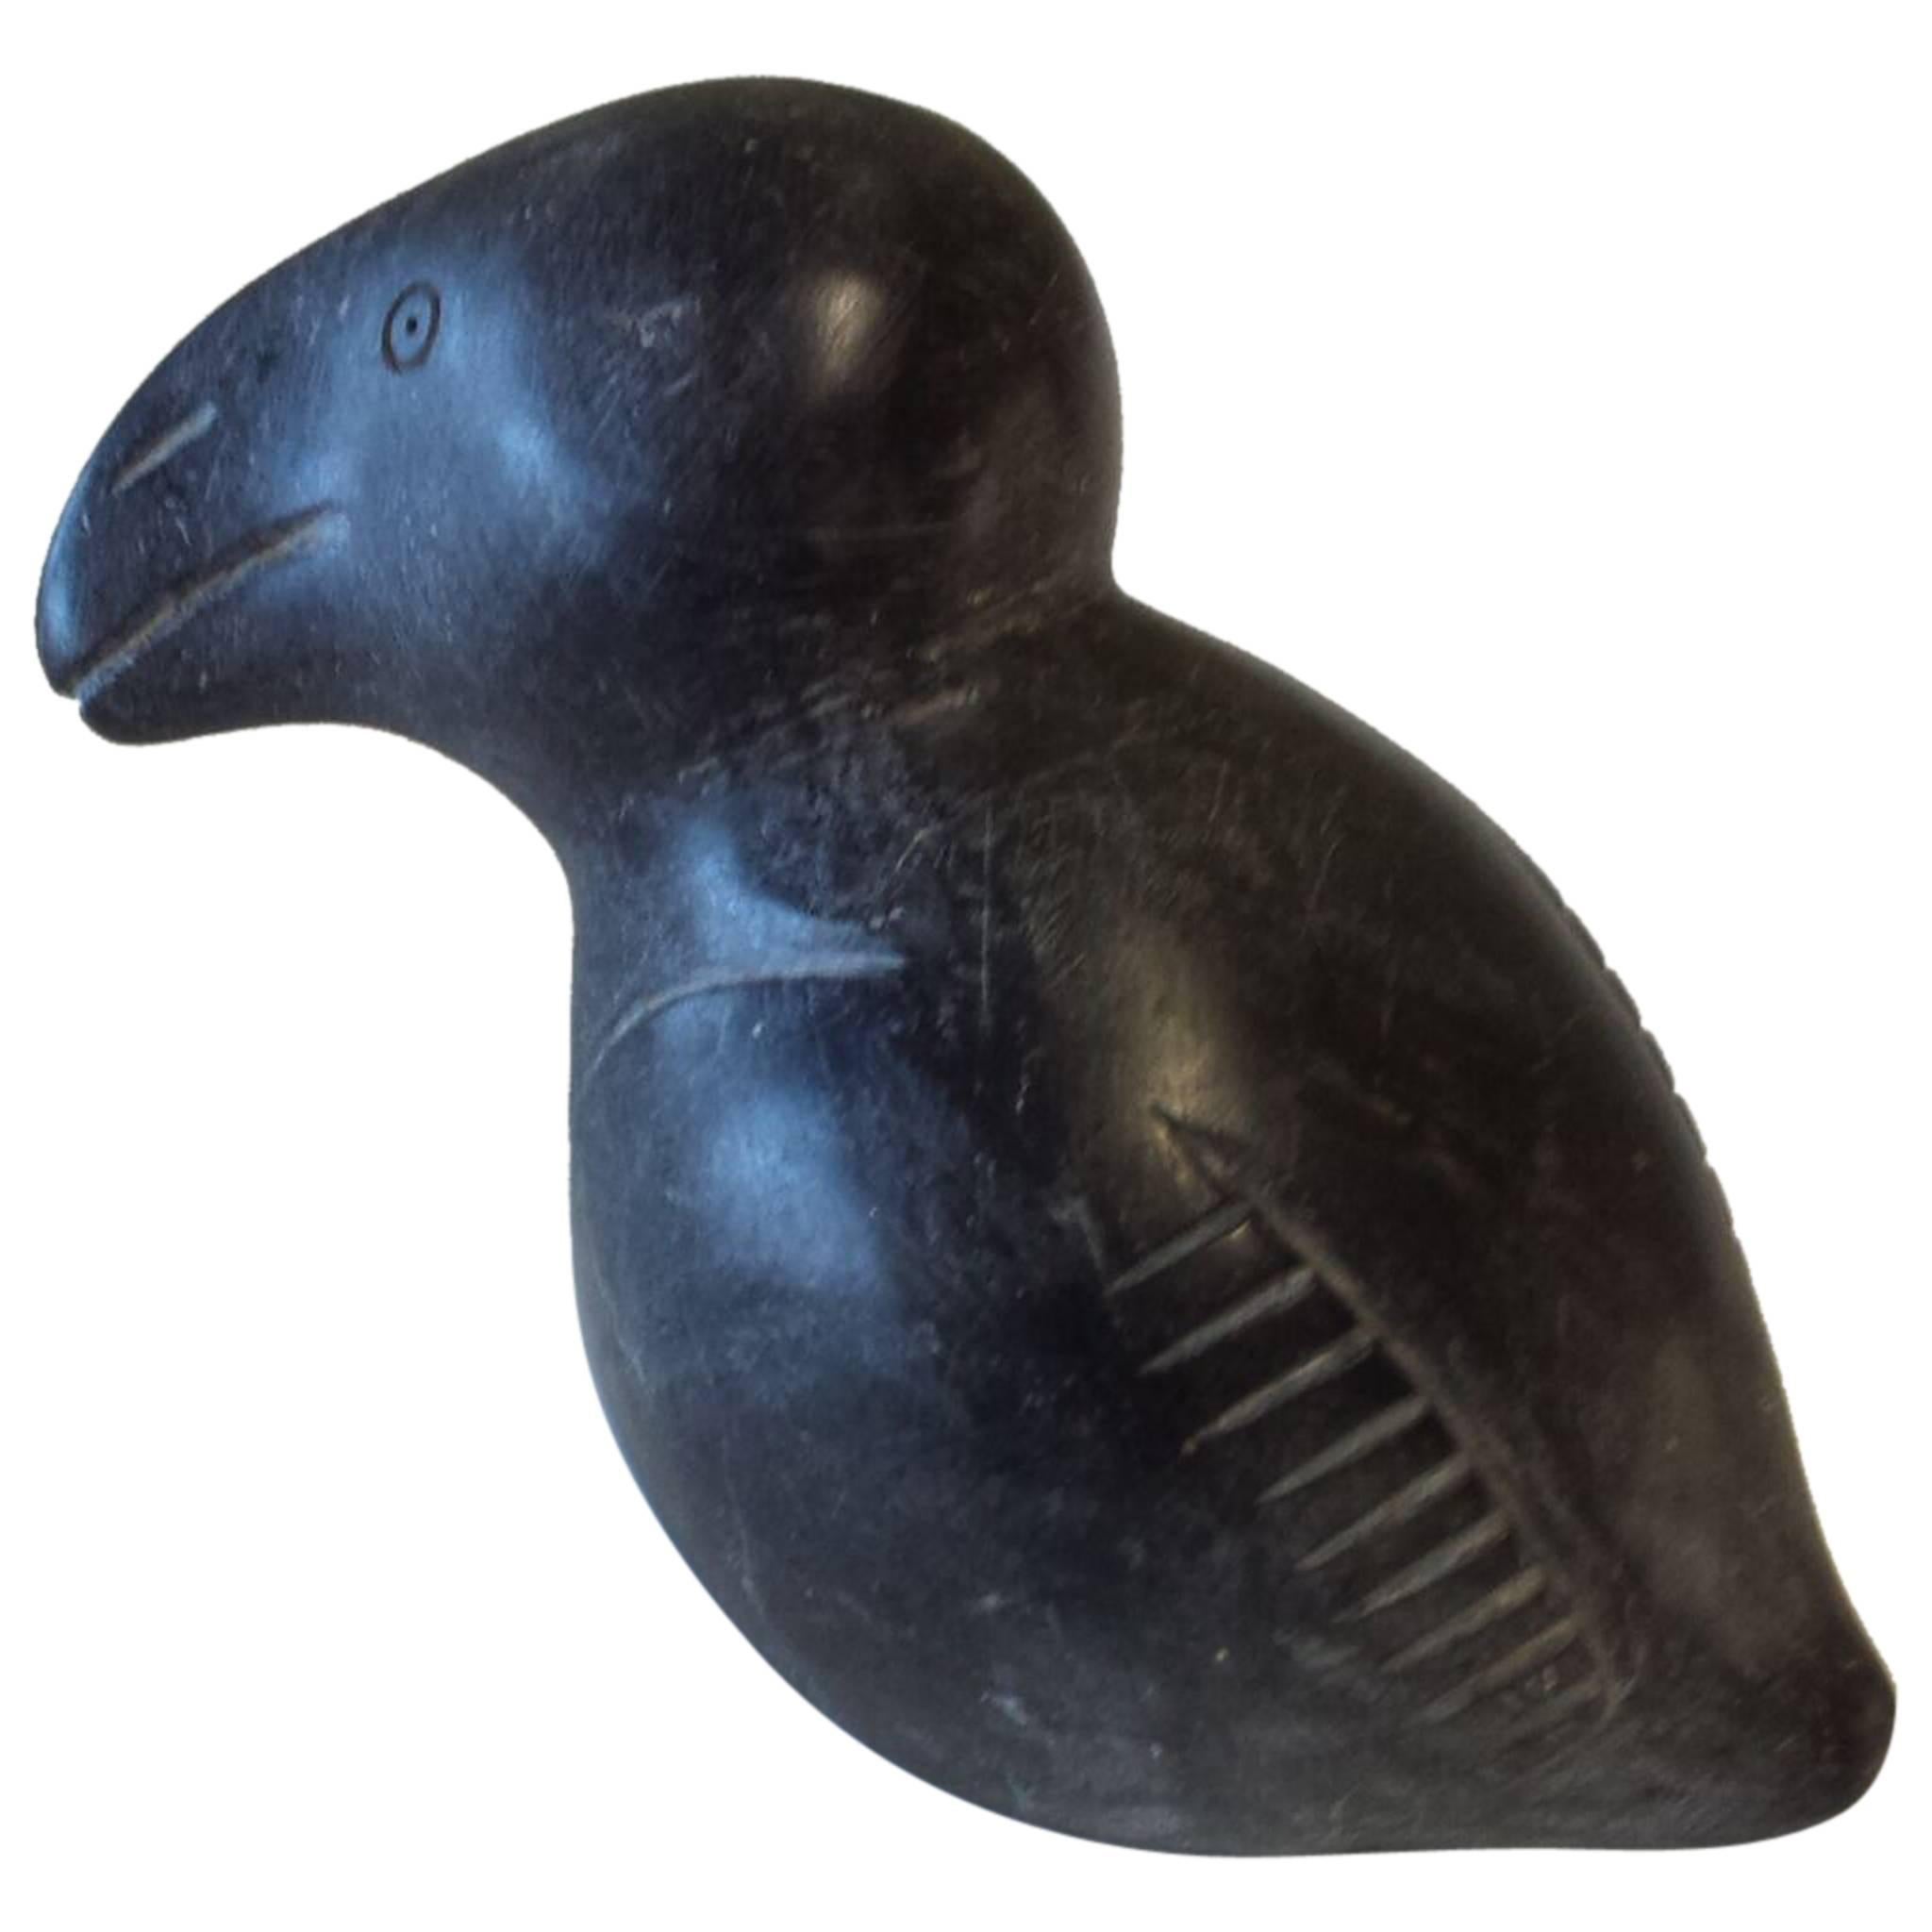 Inuit Mythical Bird Soapstone Carving Signed and Numbered with Italics